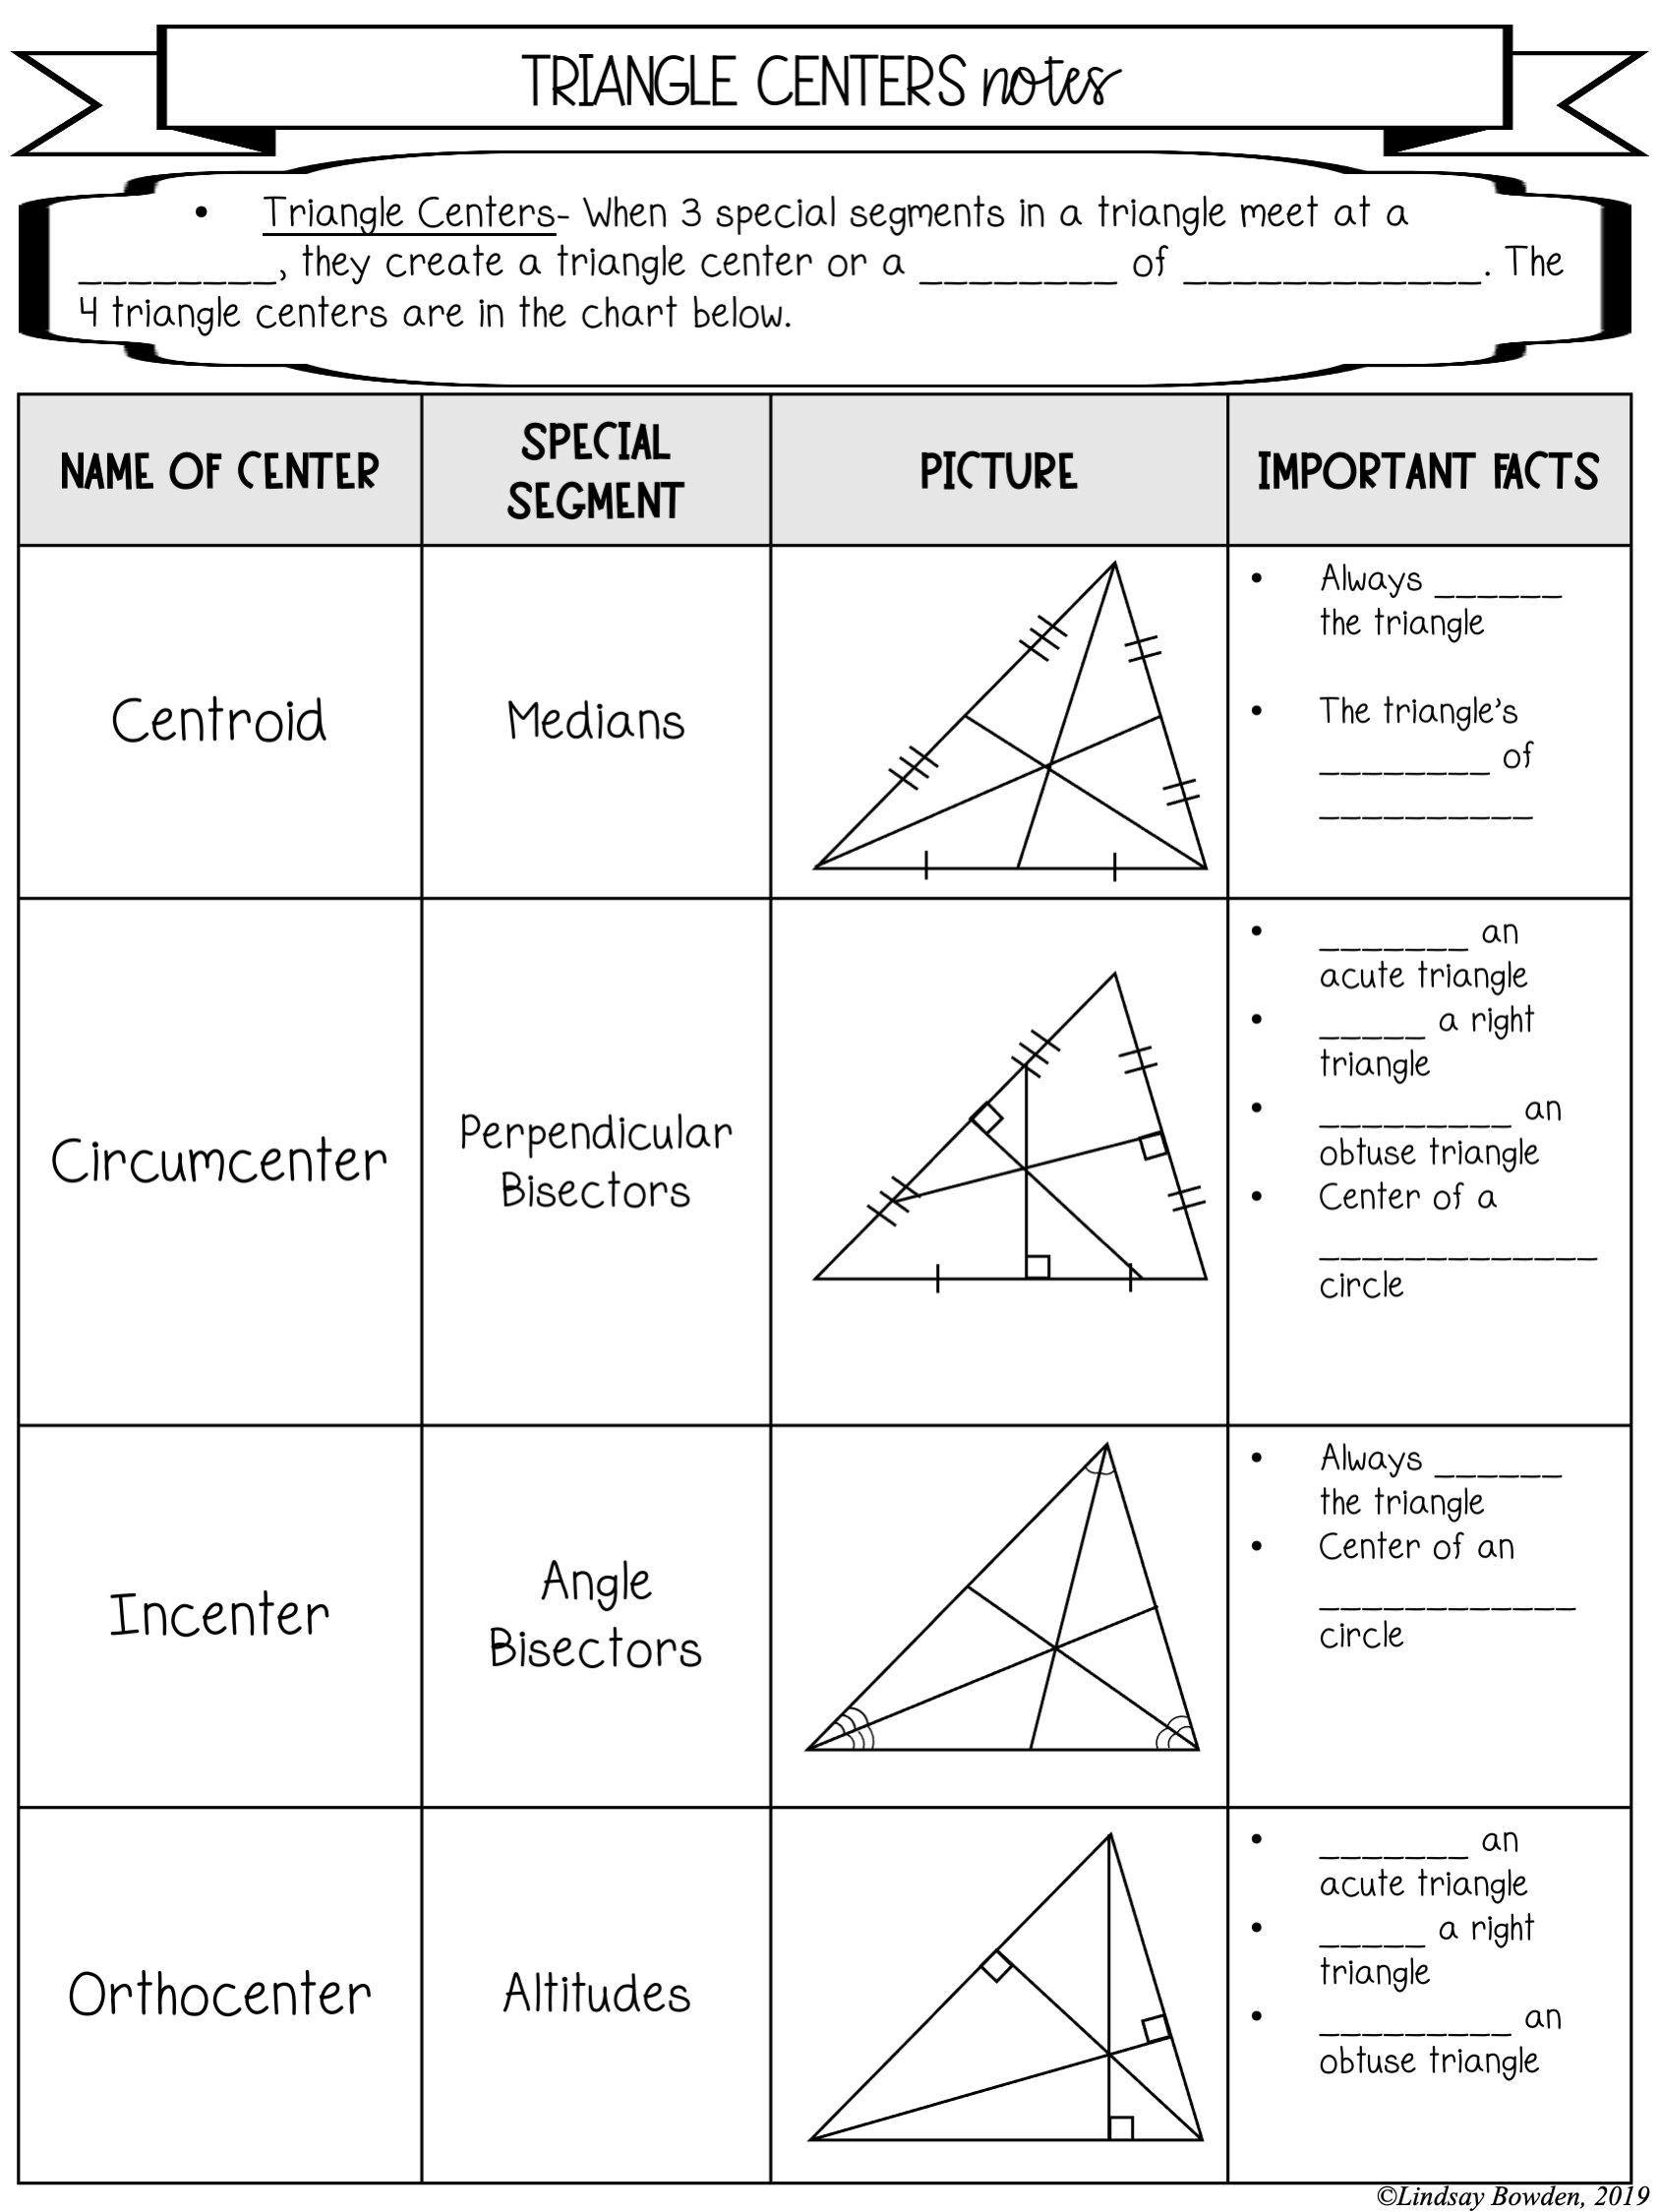 Triangle Centers Notes and Worksheets - Lindsay Bowden Regarding Centers Of Triangles Worksheet